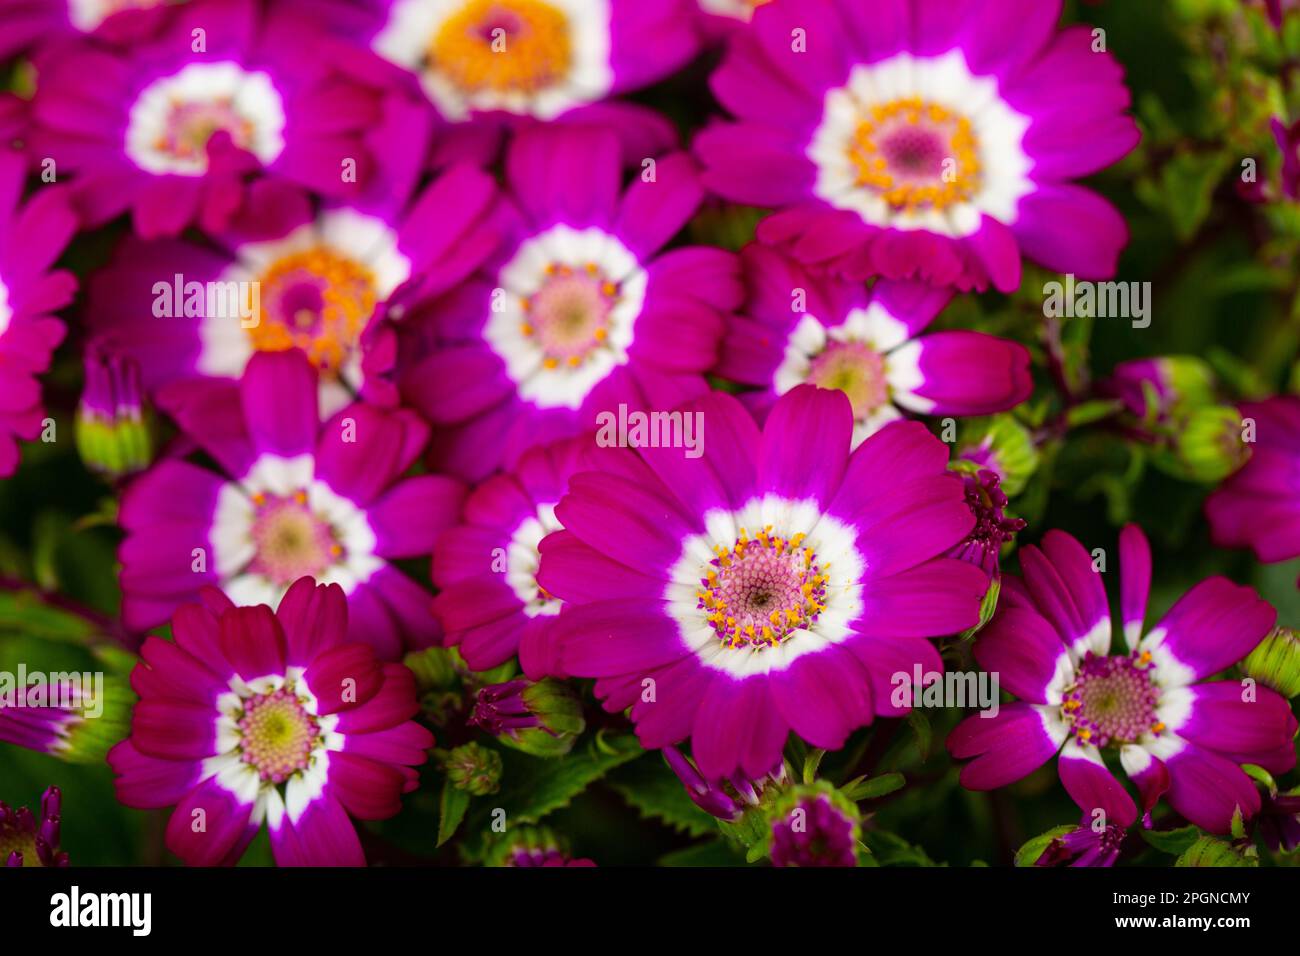 Closeup of richly blooming cineraria mauve flowers Stock Photo